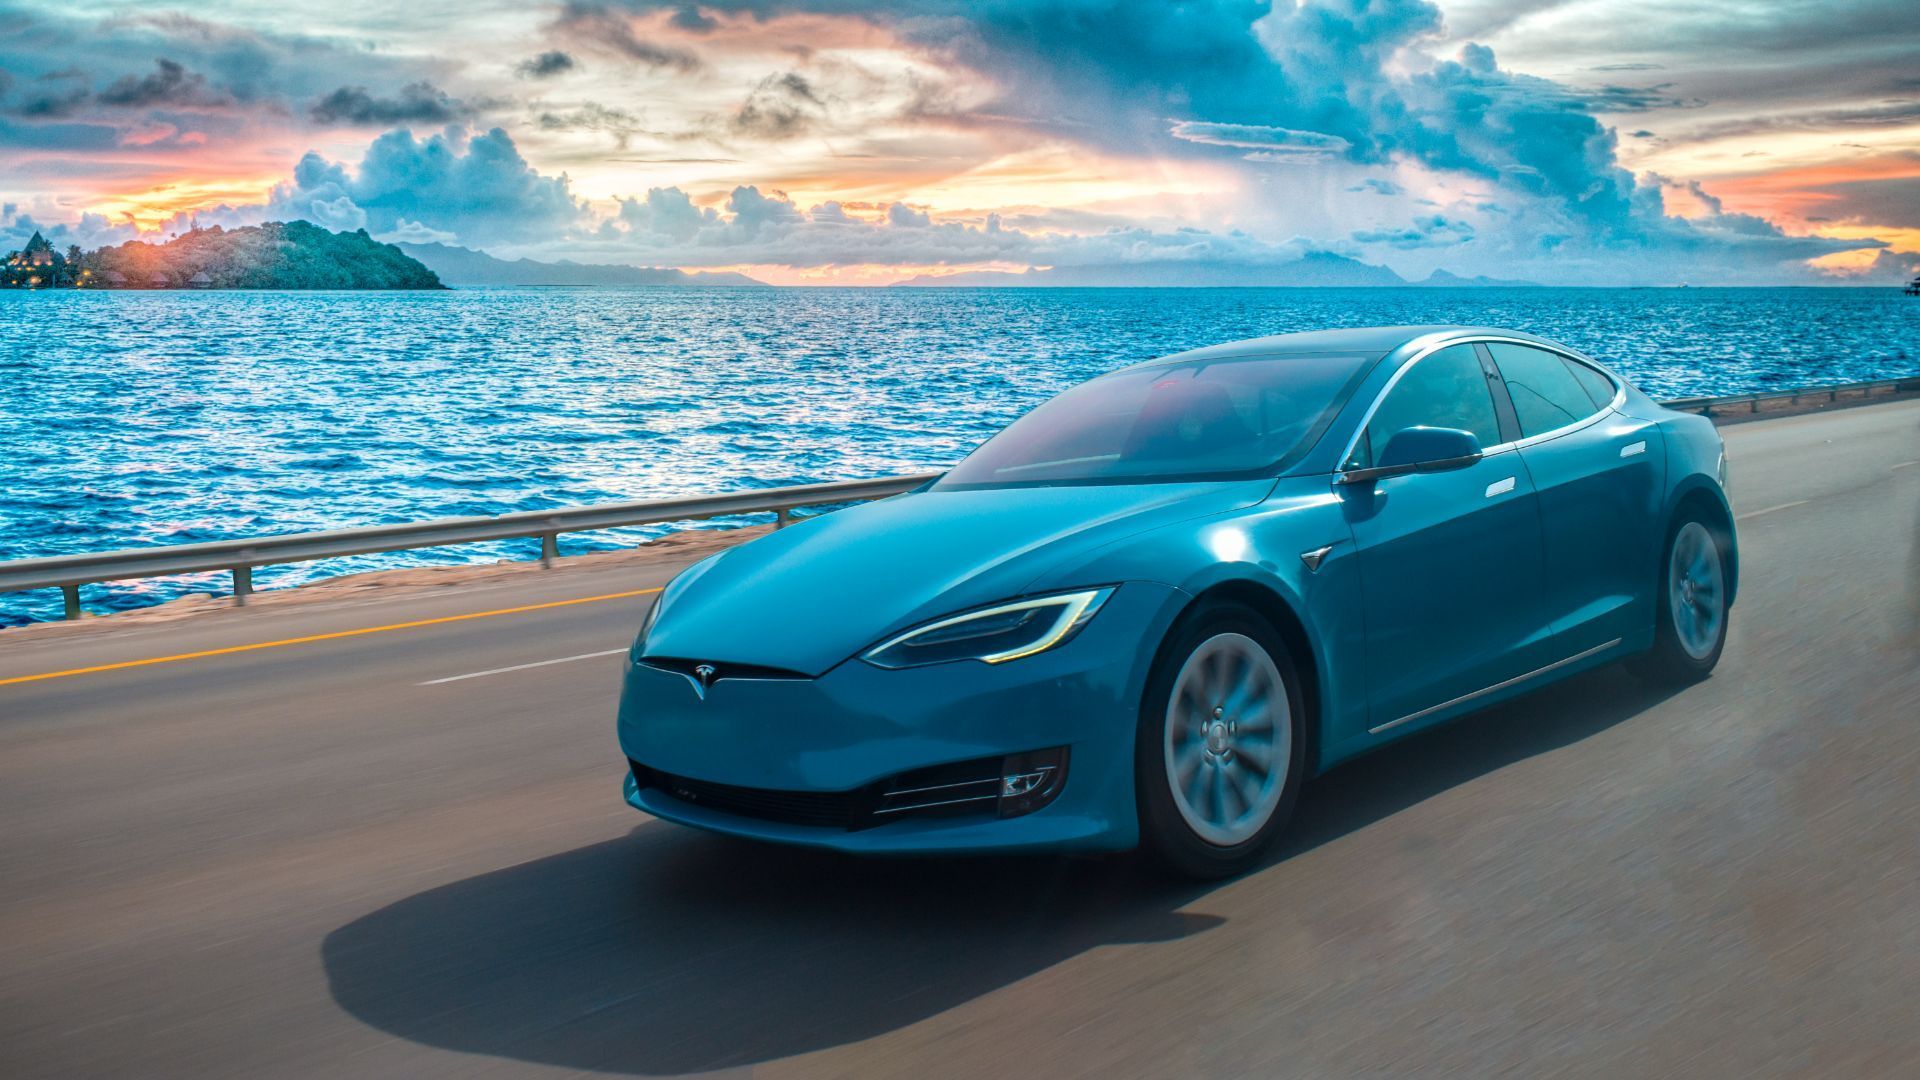 a blue Tesla model S  electric vehicle is driving down a road next to the ocean.